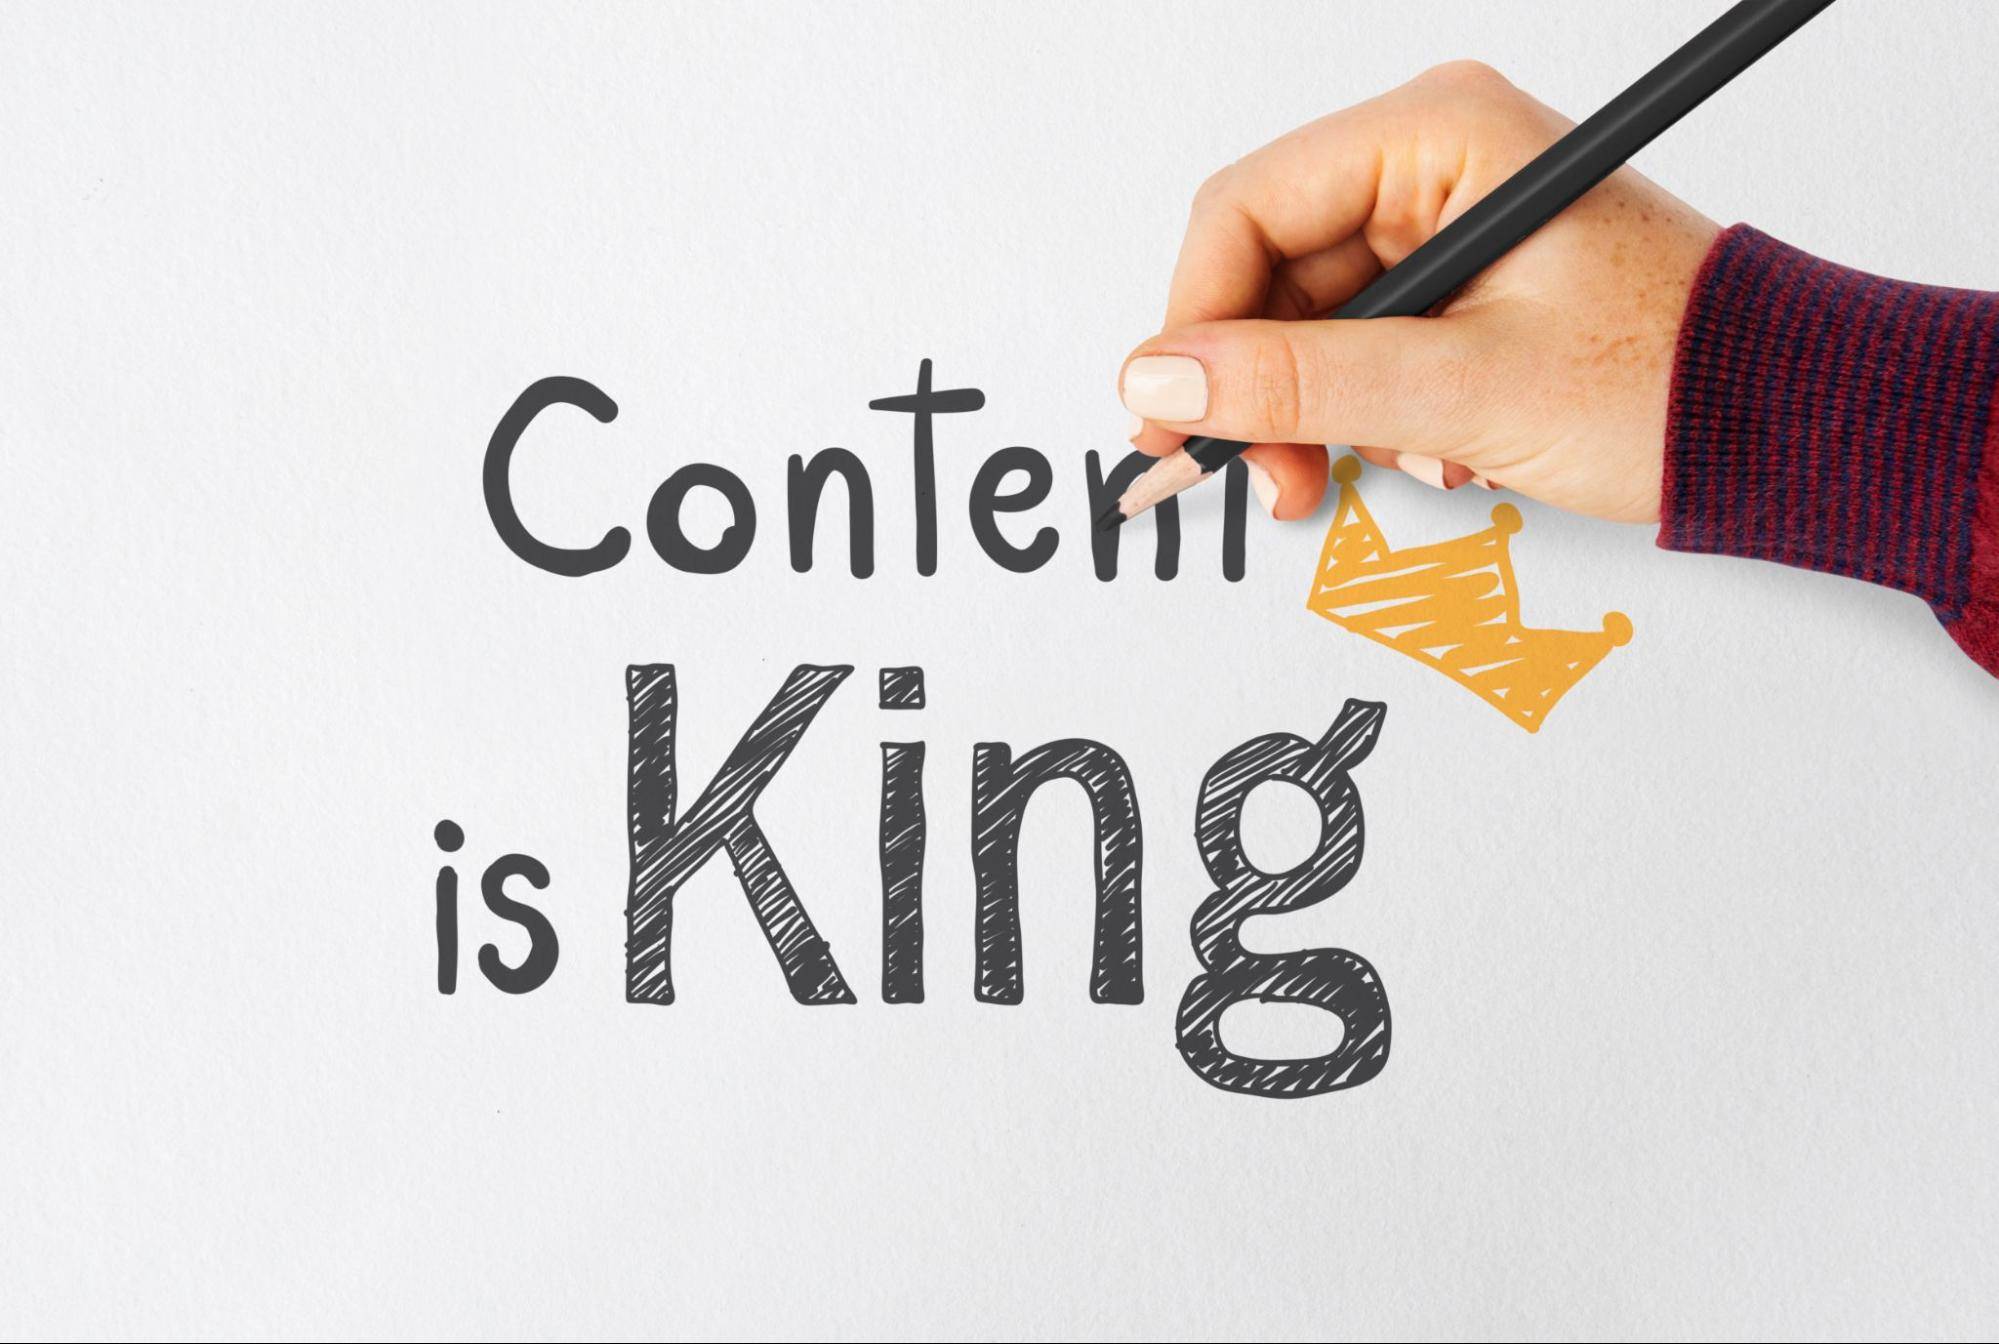 Content driven. Контент is the King. Content is King. Контент надпись. Креативный контент.